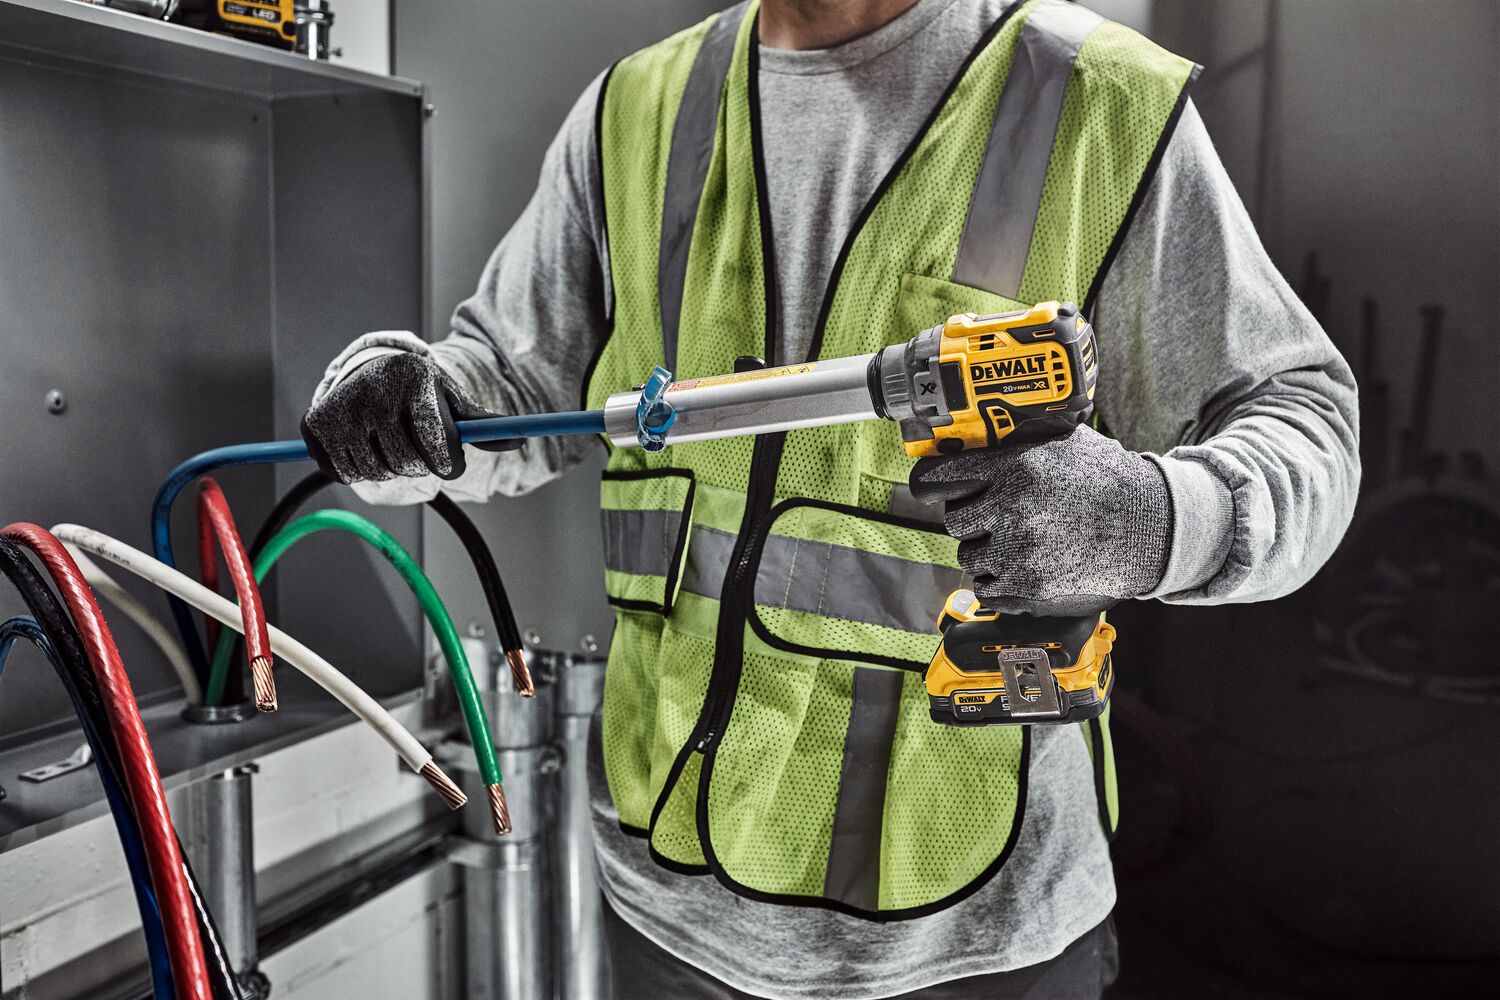 DEWALT Cable Stripper is used to strip a blue cable by a tradesman in an electrical room.